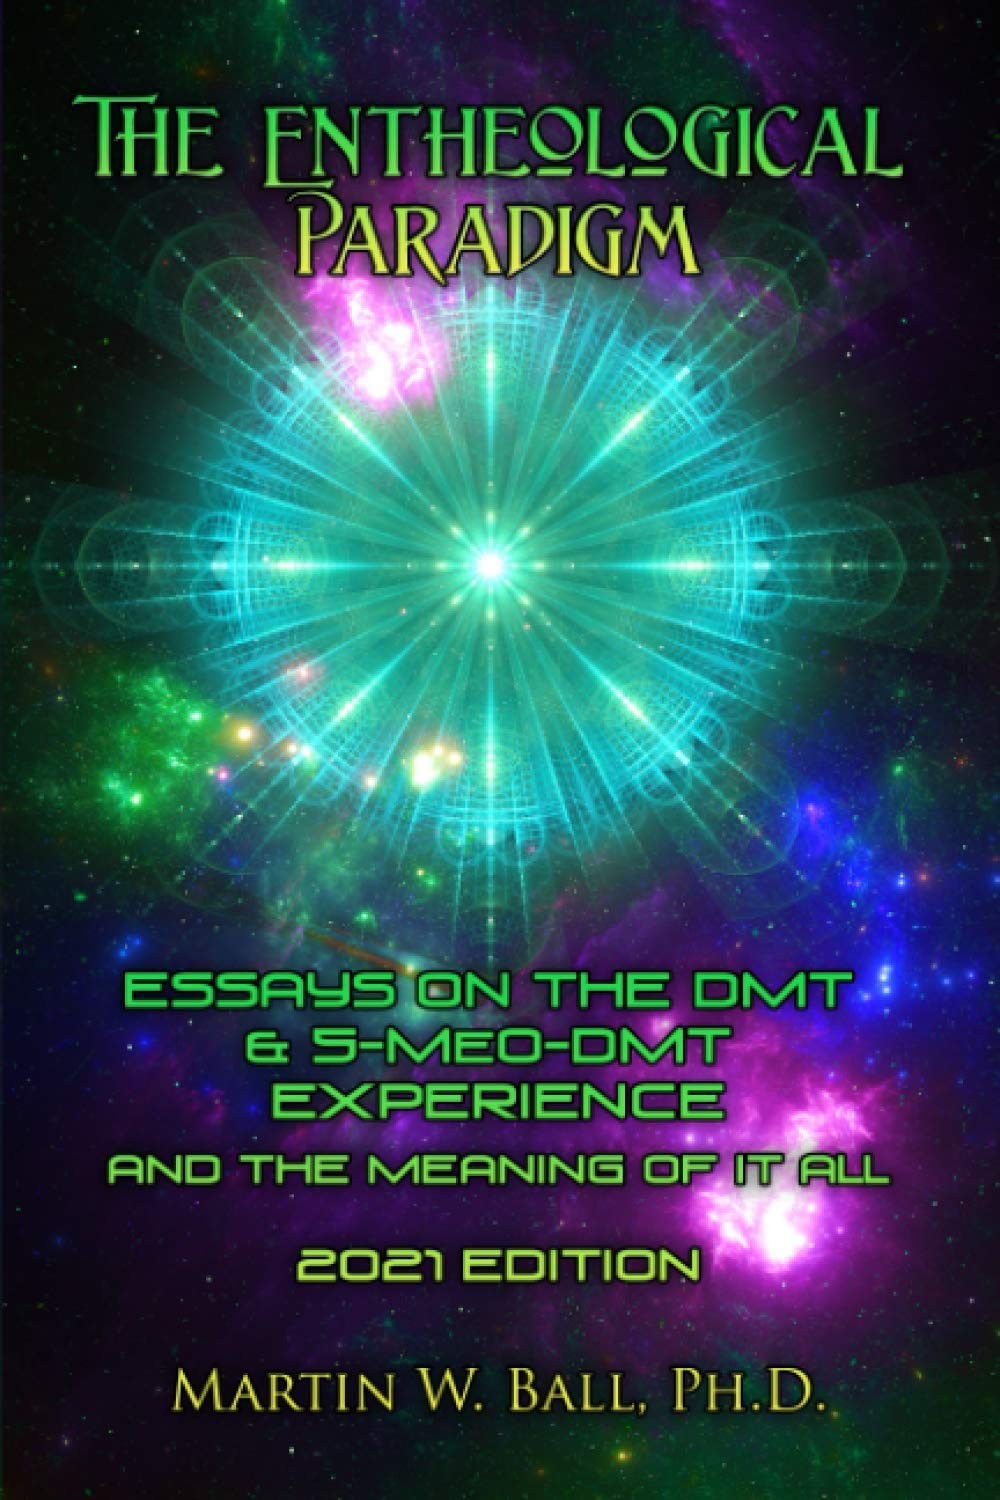 The Entheological Paradigm: Essays on the DMT and 5-MeO-DMT Experience and the Meaning of It All - 2021 Edition